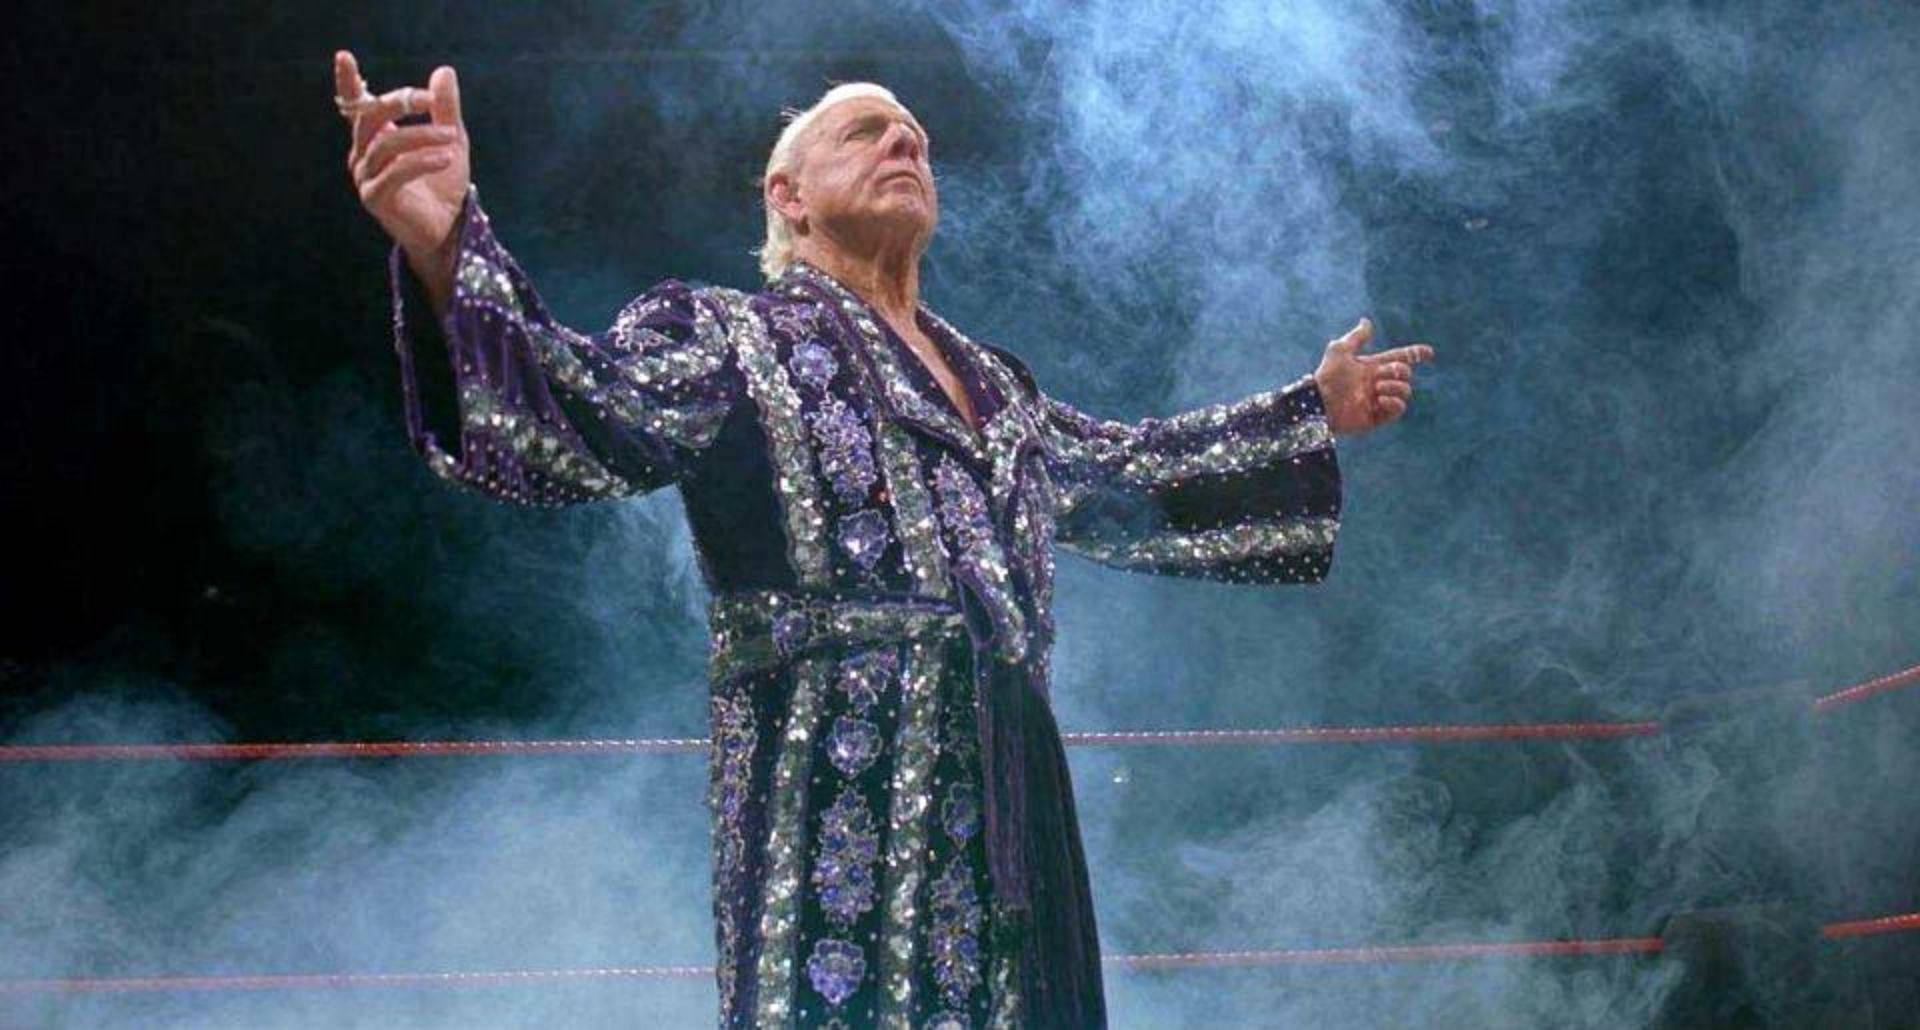 Ric Flair is considered to be one of the greatest wrestlers of all time.